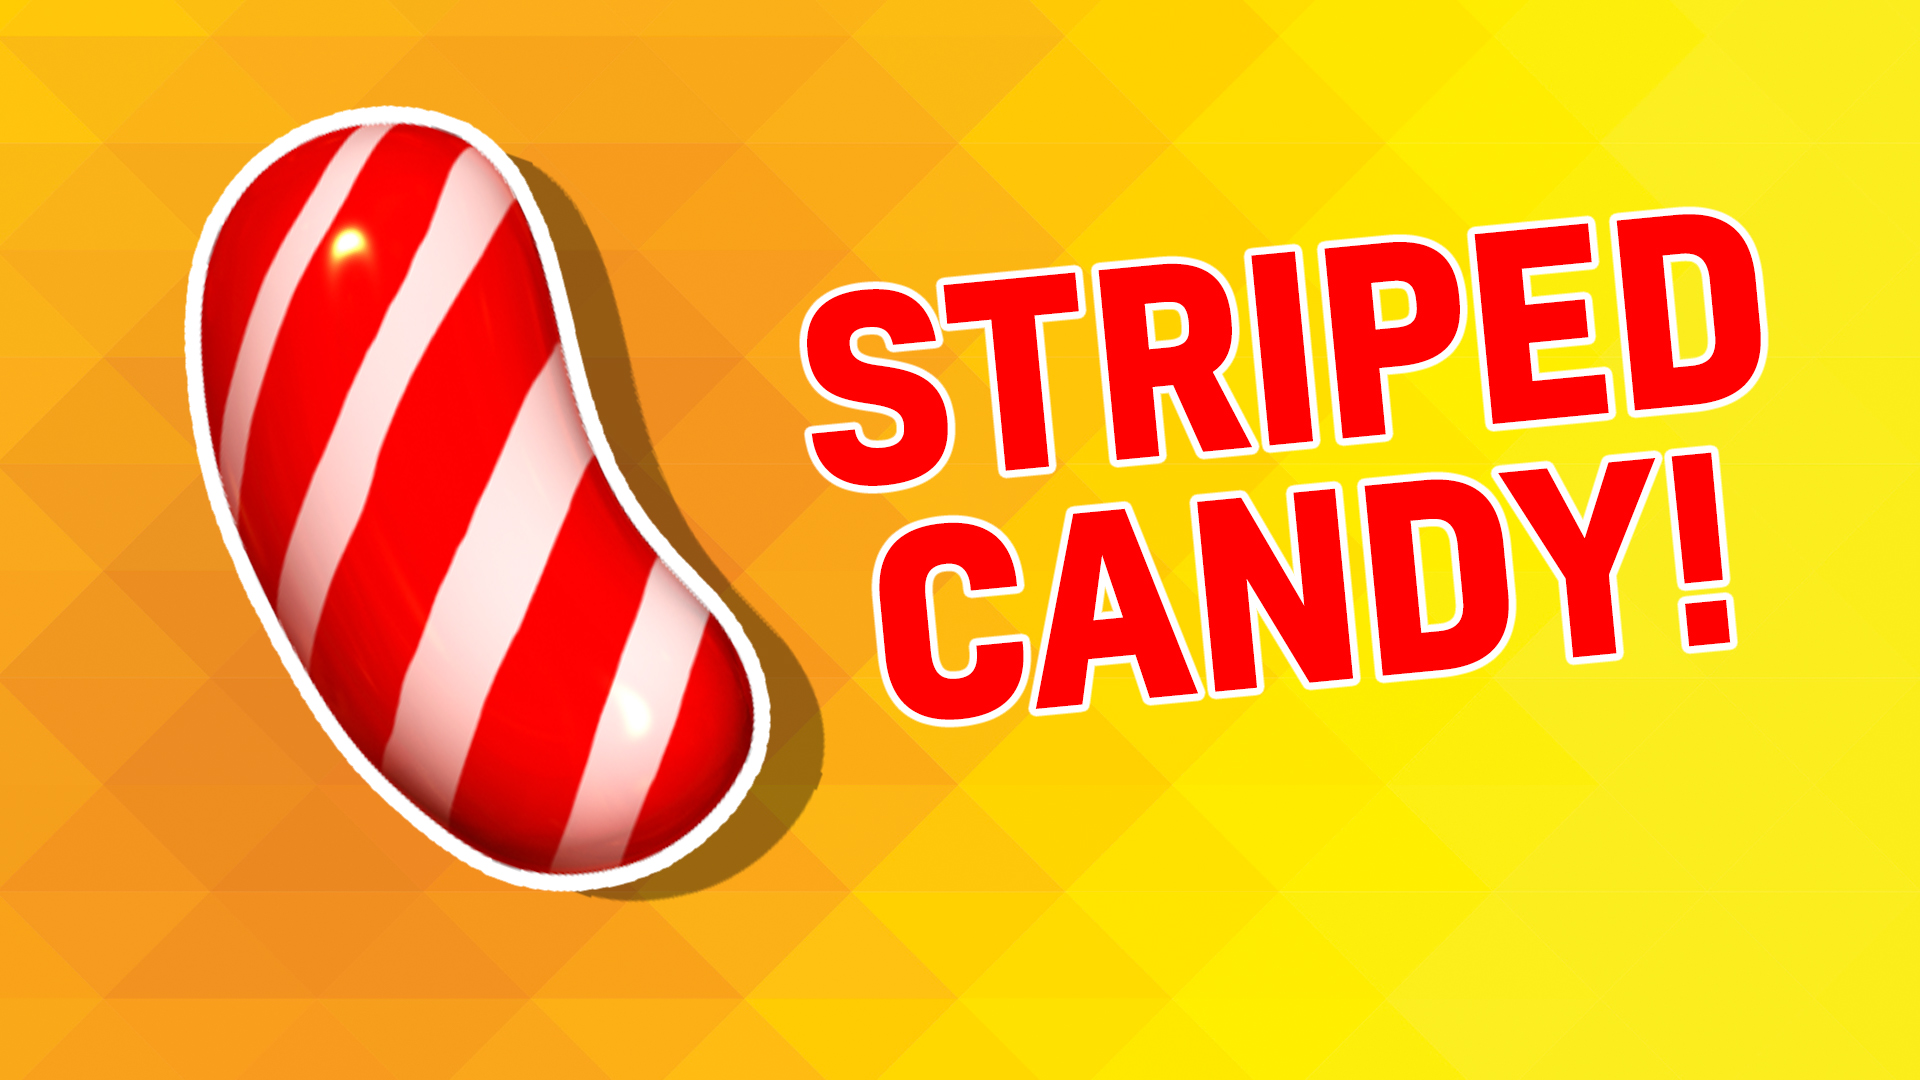 Striped candy